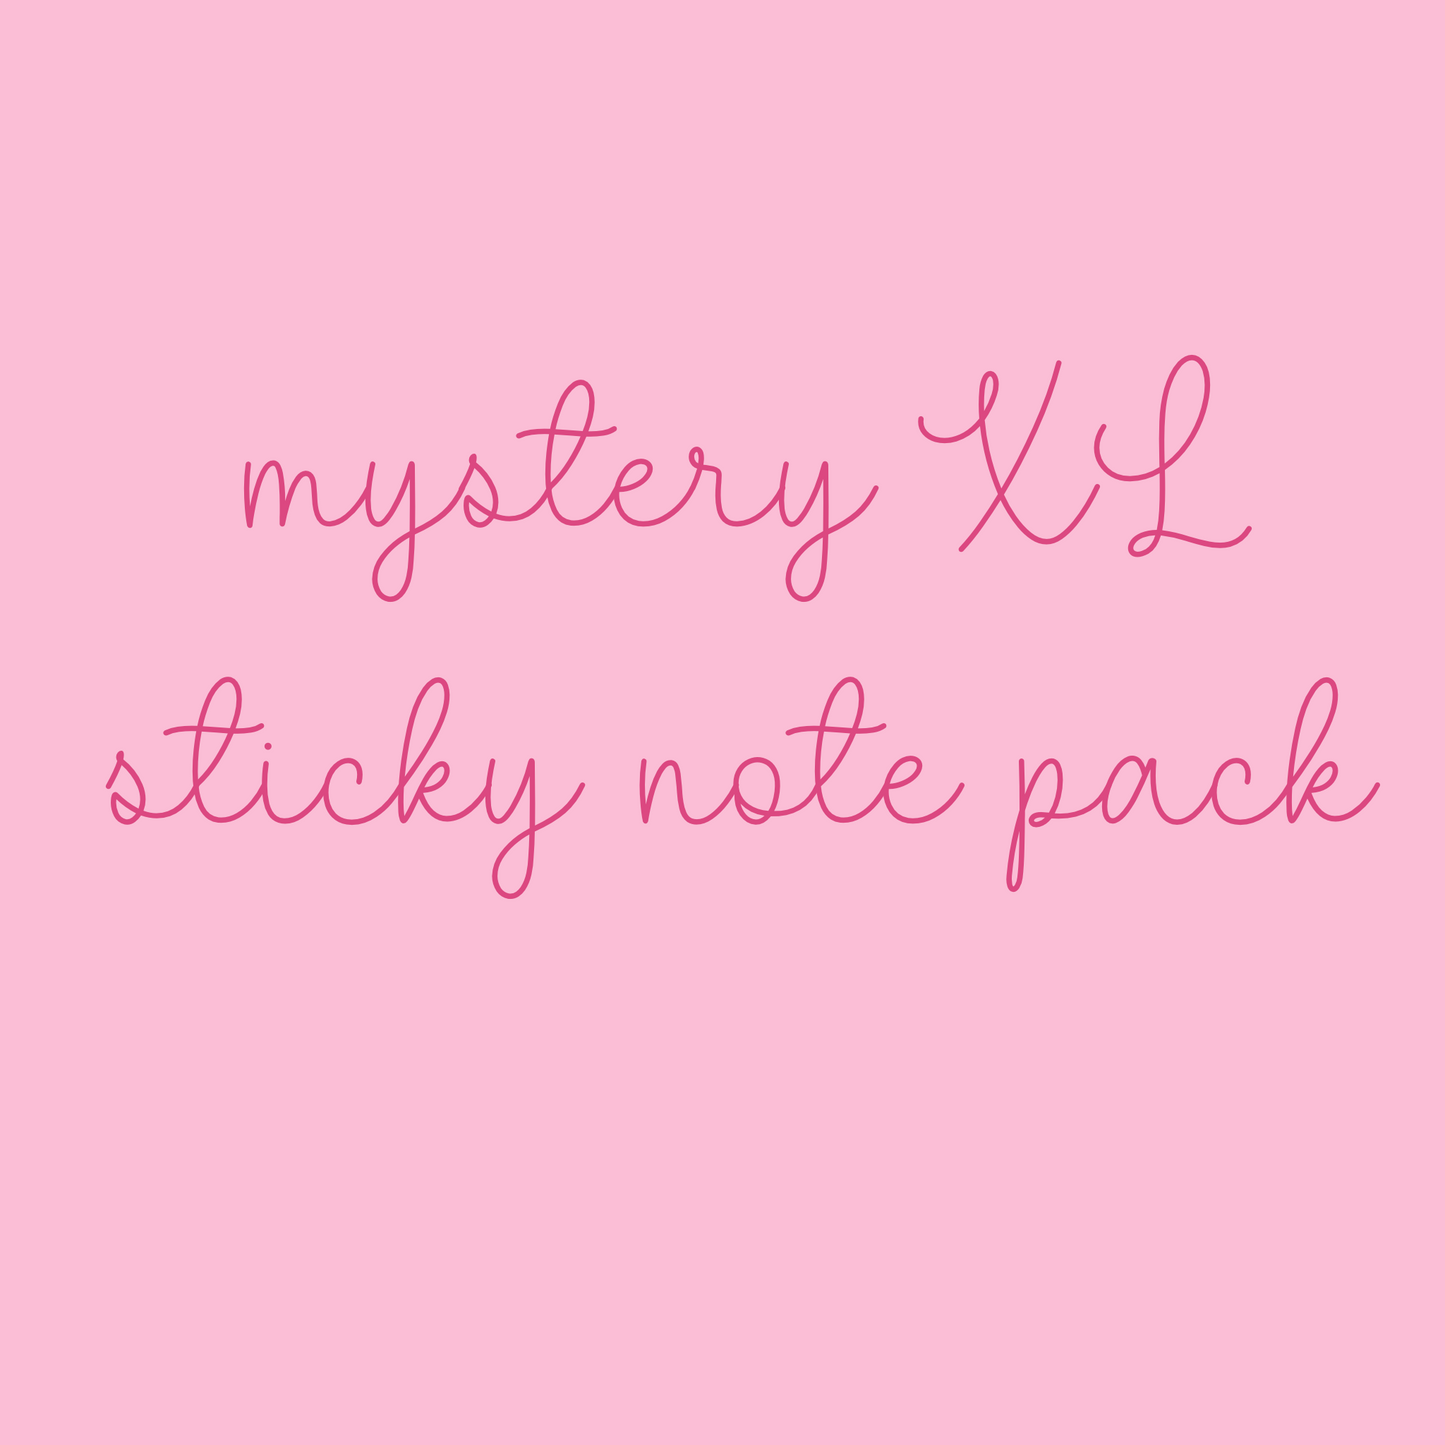 OOPSIE  MYSTERY LARGE XL STICKY NOTE PACK (2 Large XL Sticky Notes)